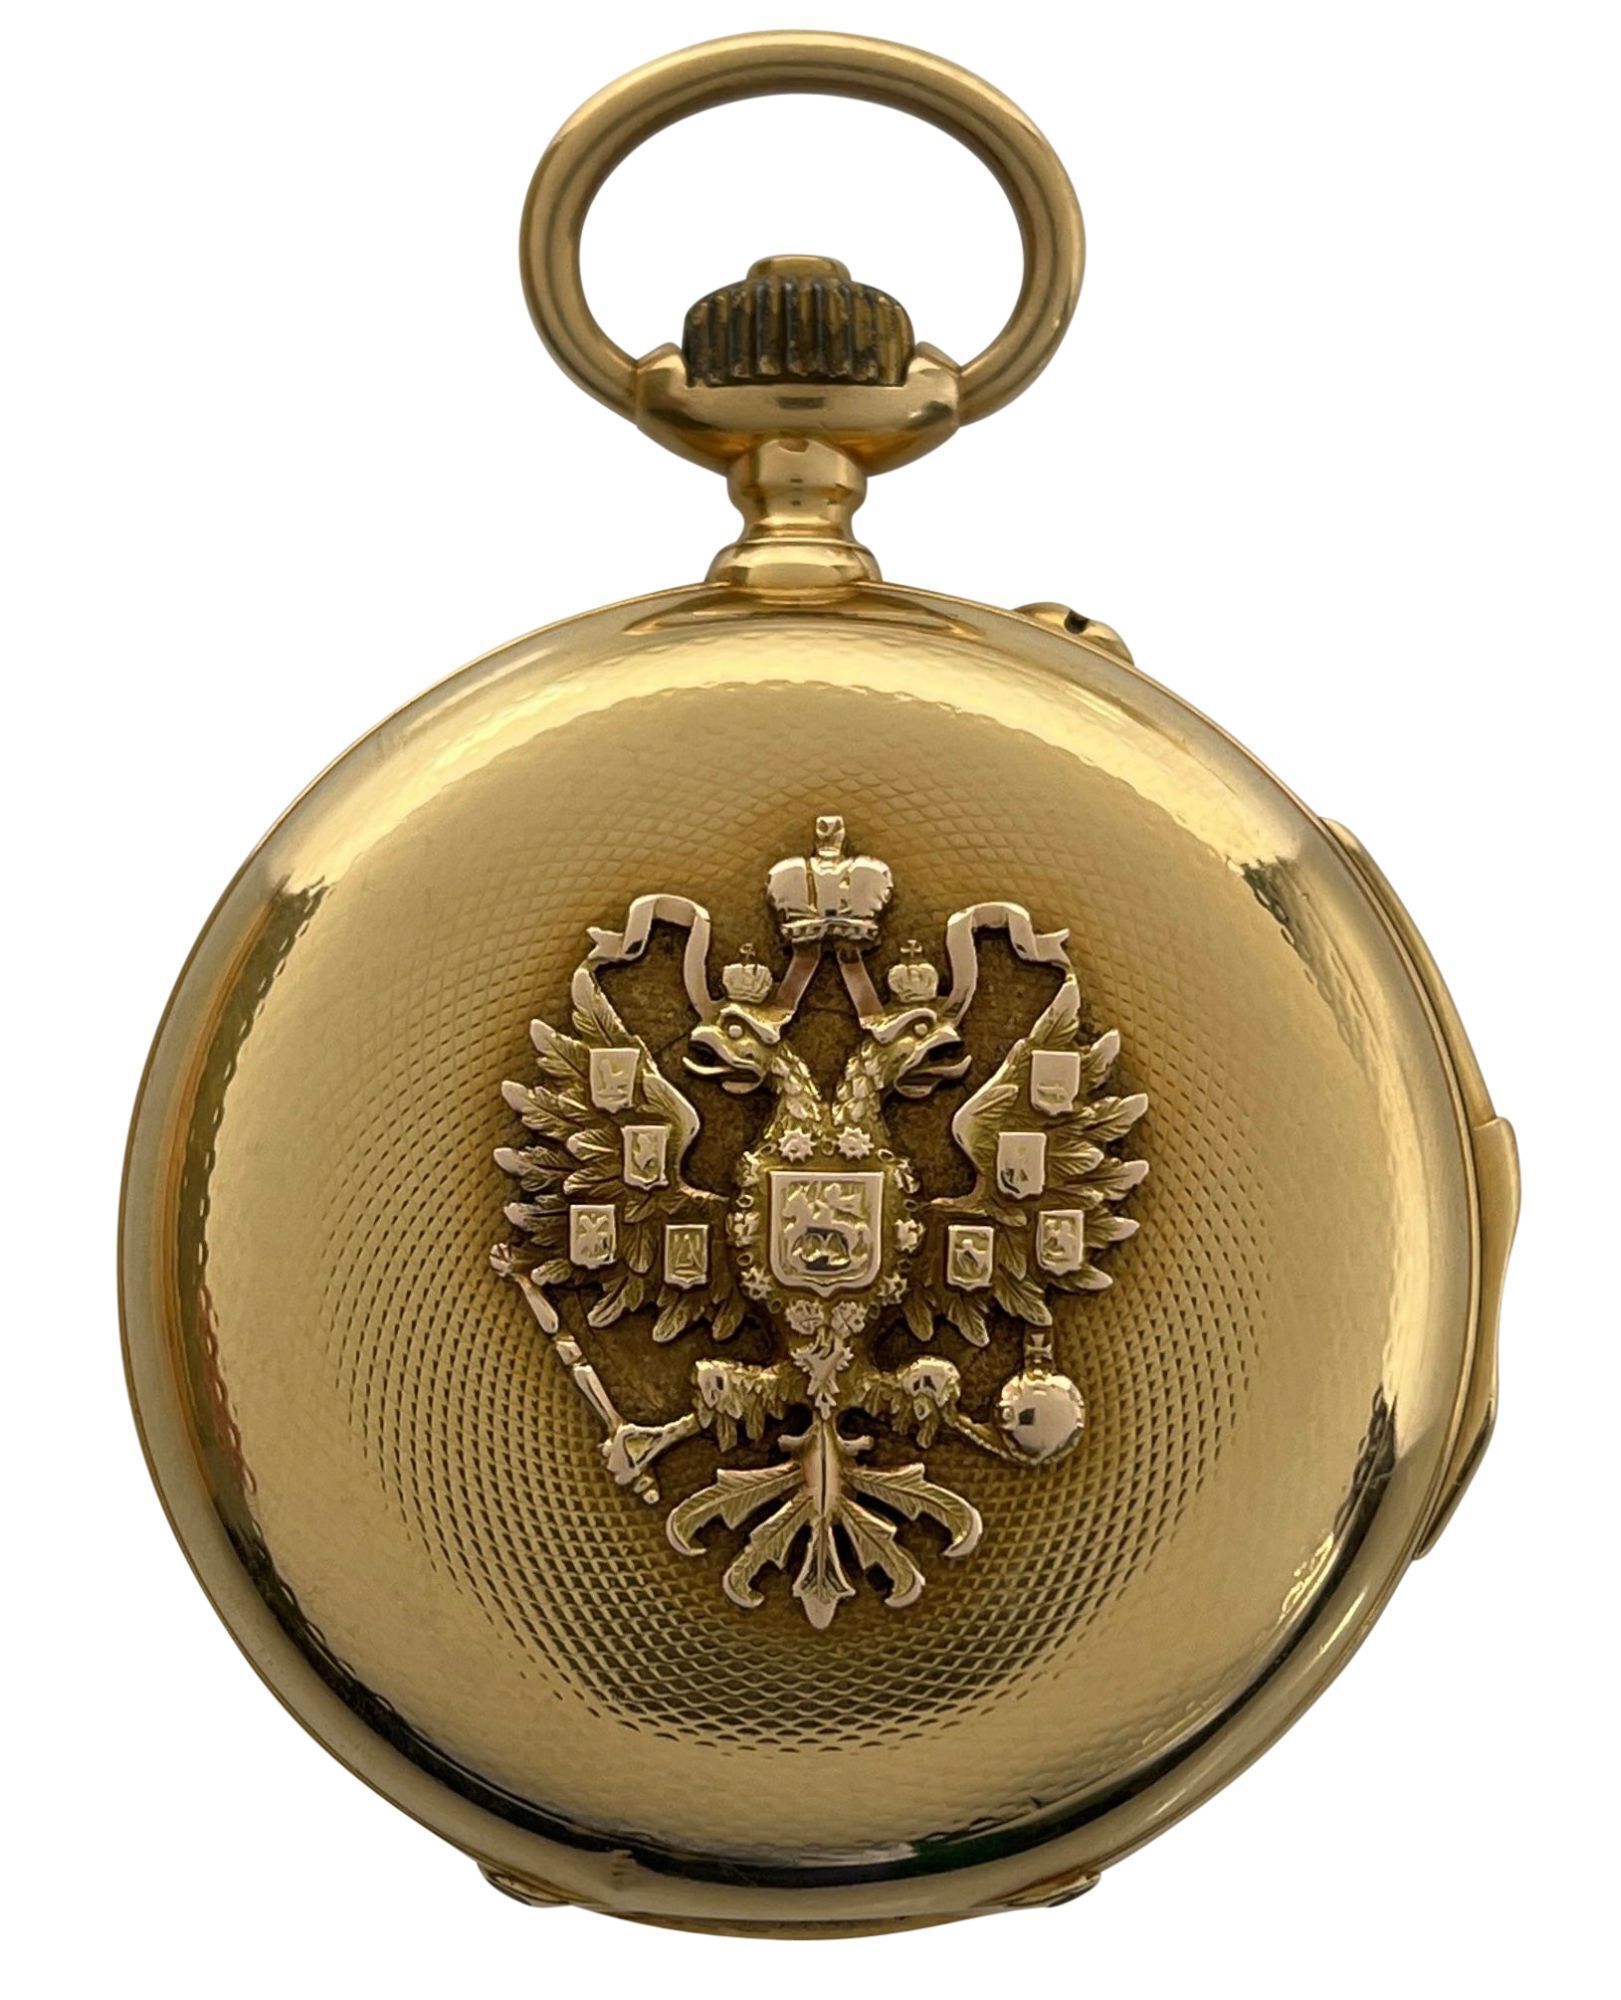 L. Audemars Russian Market Minute Repeater 18K Gold Hunting Case Pocket Watch